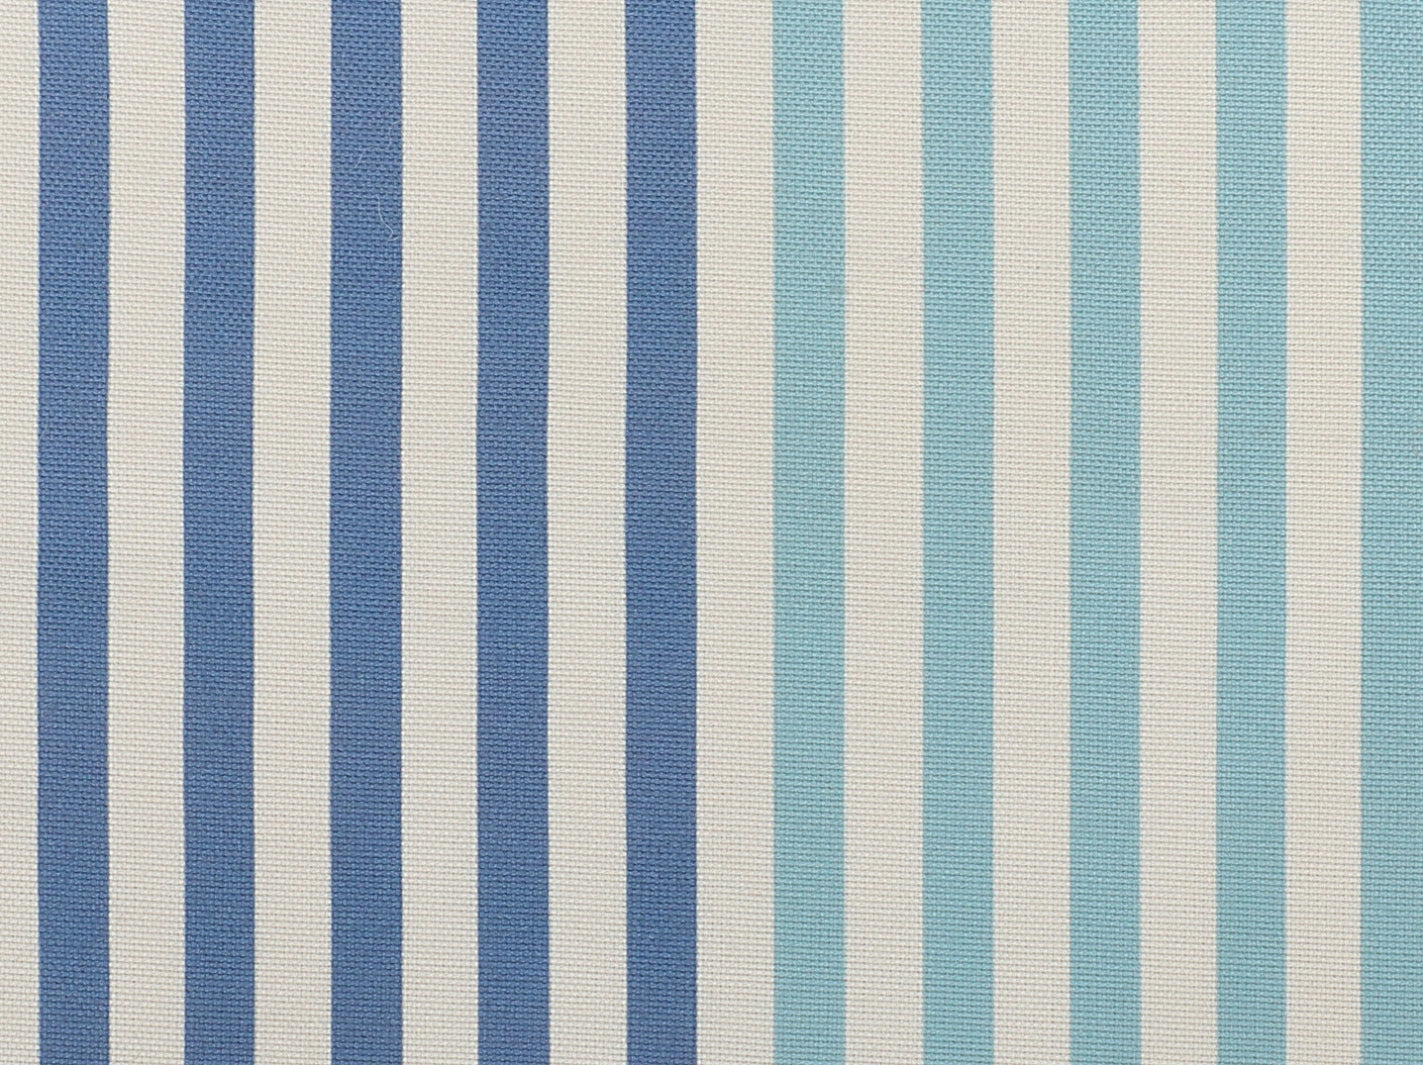 Blue and Aqua Striped Placemat - Pack of 6